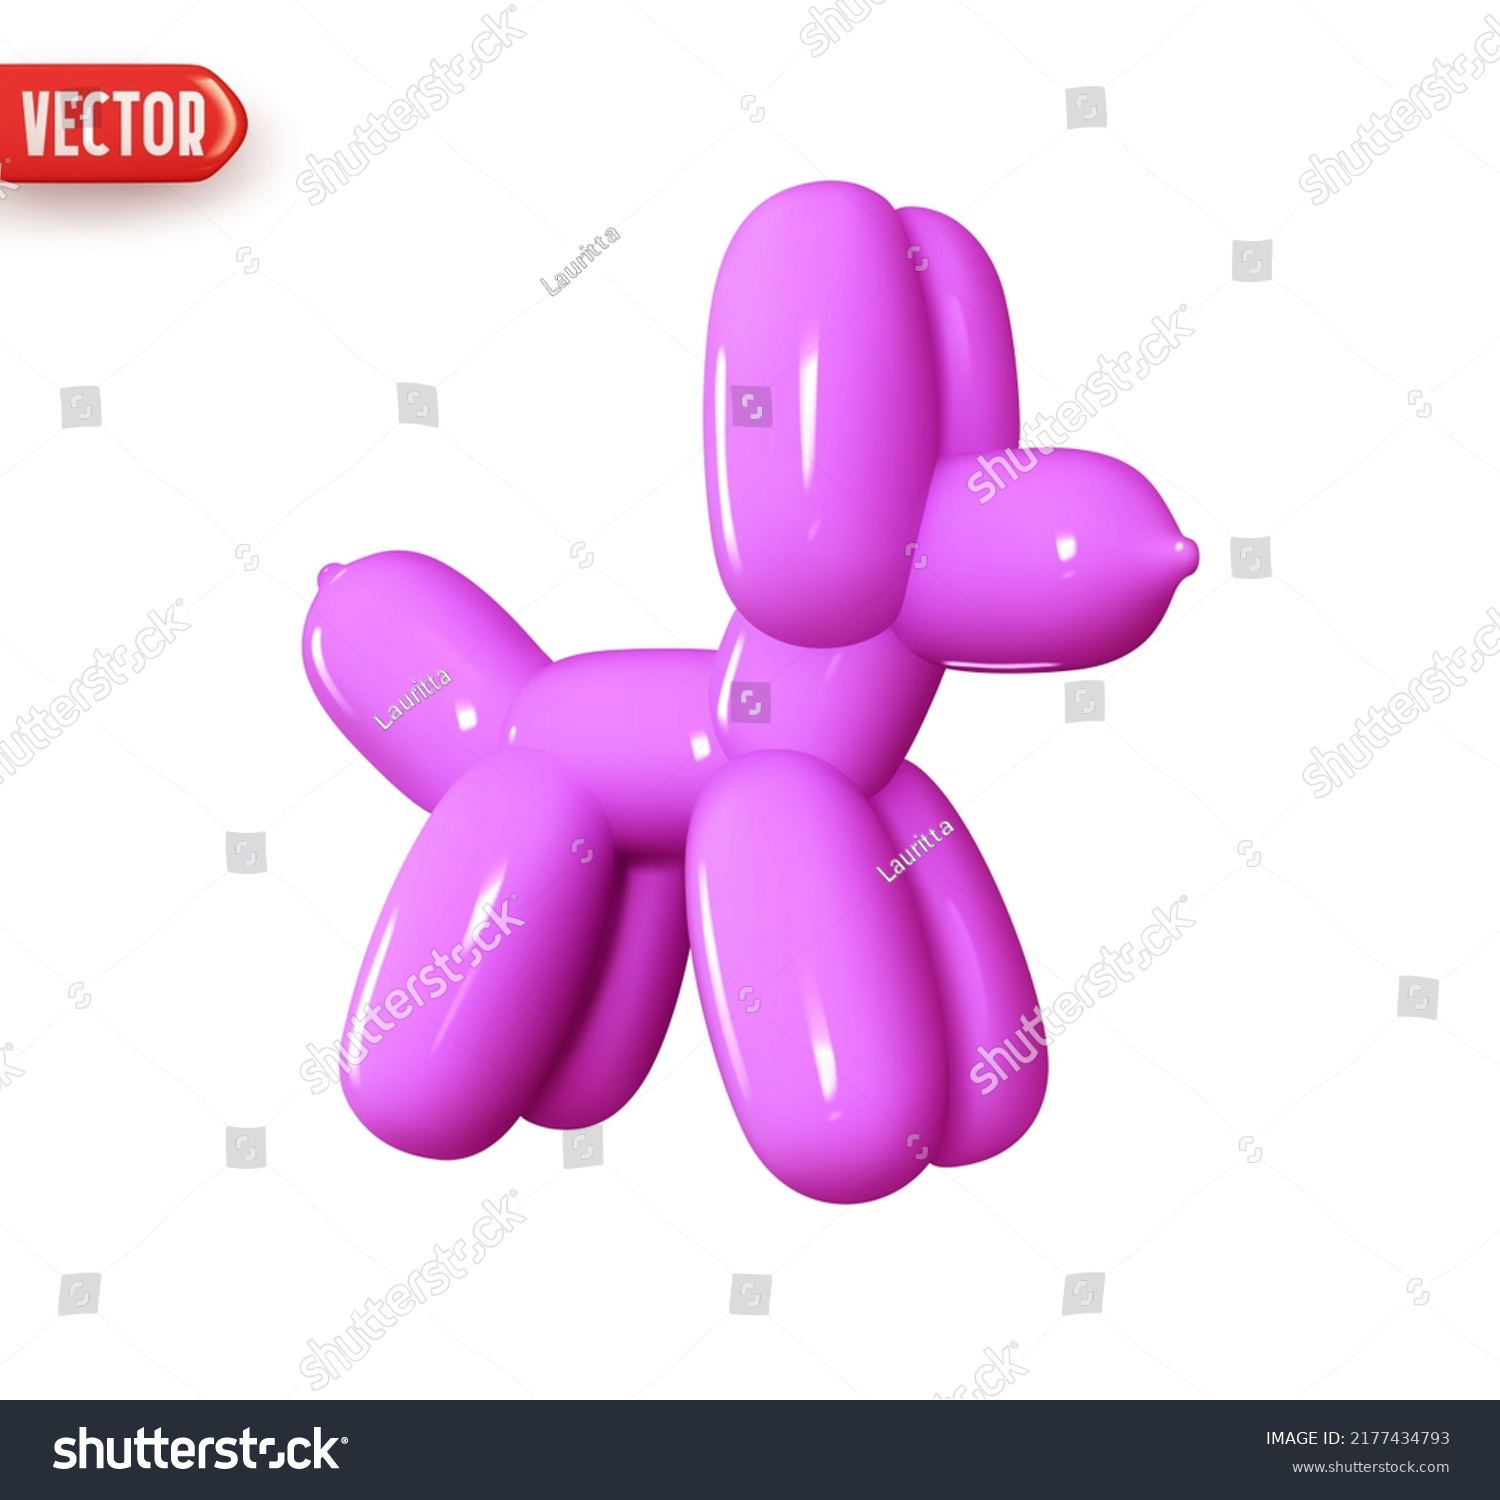 Dog Helium balloon purple color. Realistic 3d design element In plastic cartoon style. Icon isolated on white background. Vector illustration #2177434793